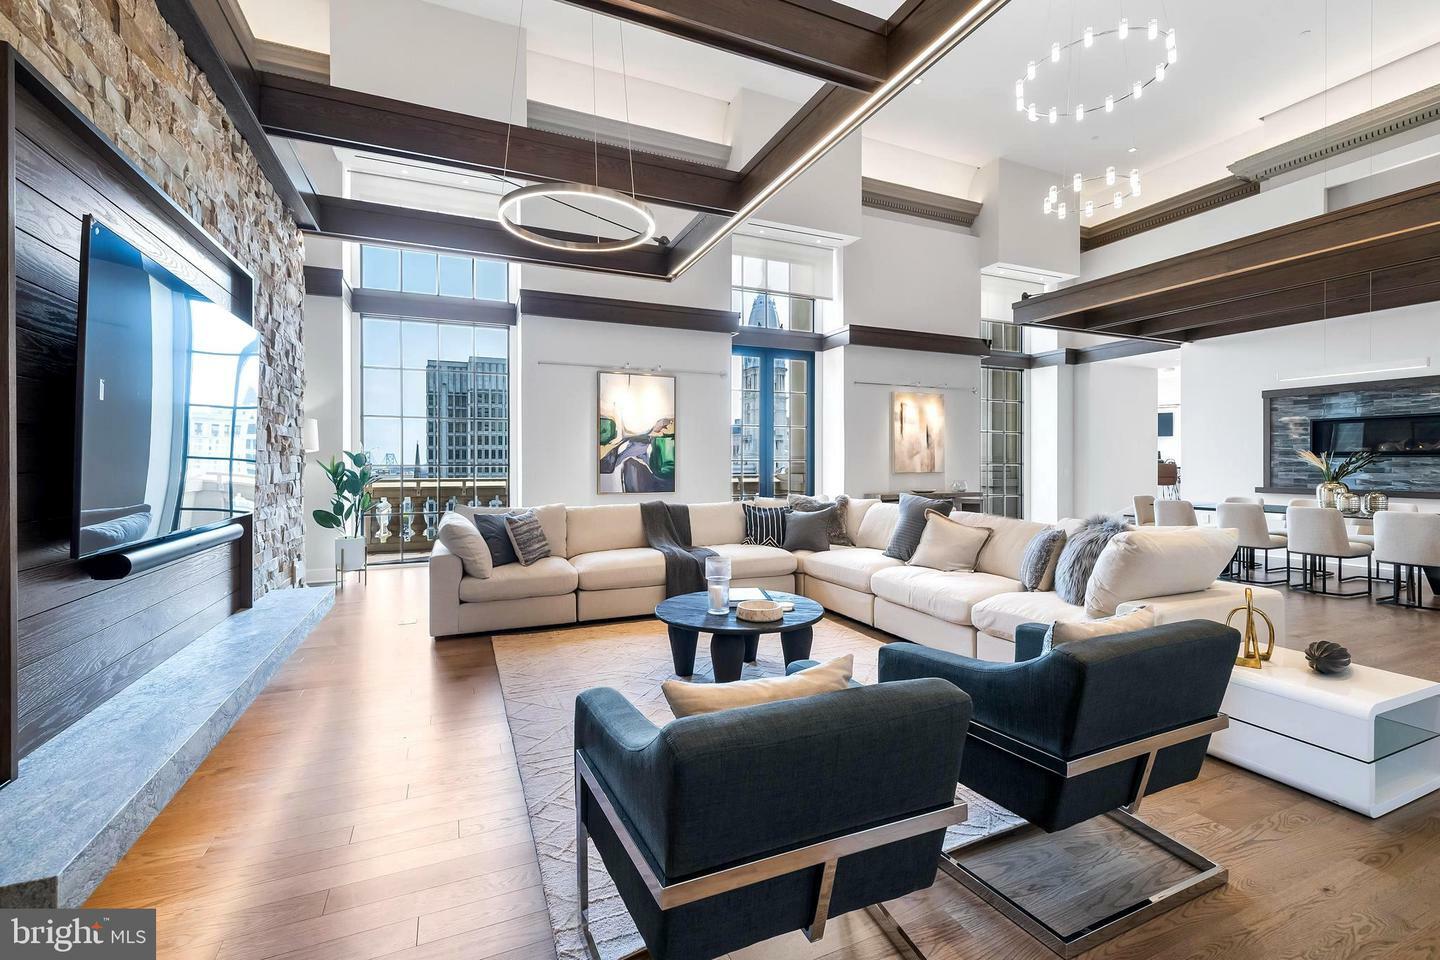 Elegant and spacious living room in a modern Philadelphia apartment showcasing contemporary decor and large windows with city views.